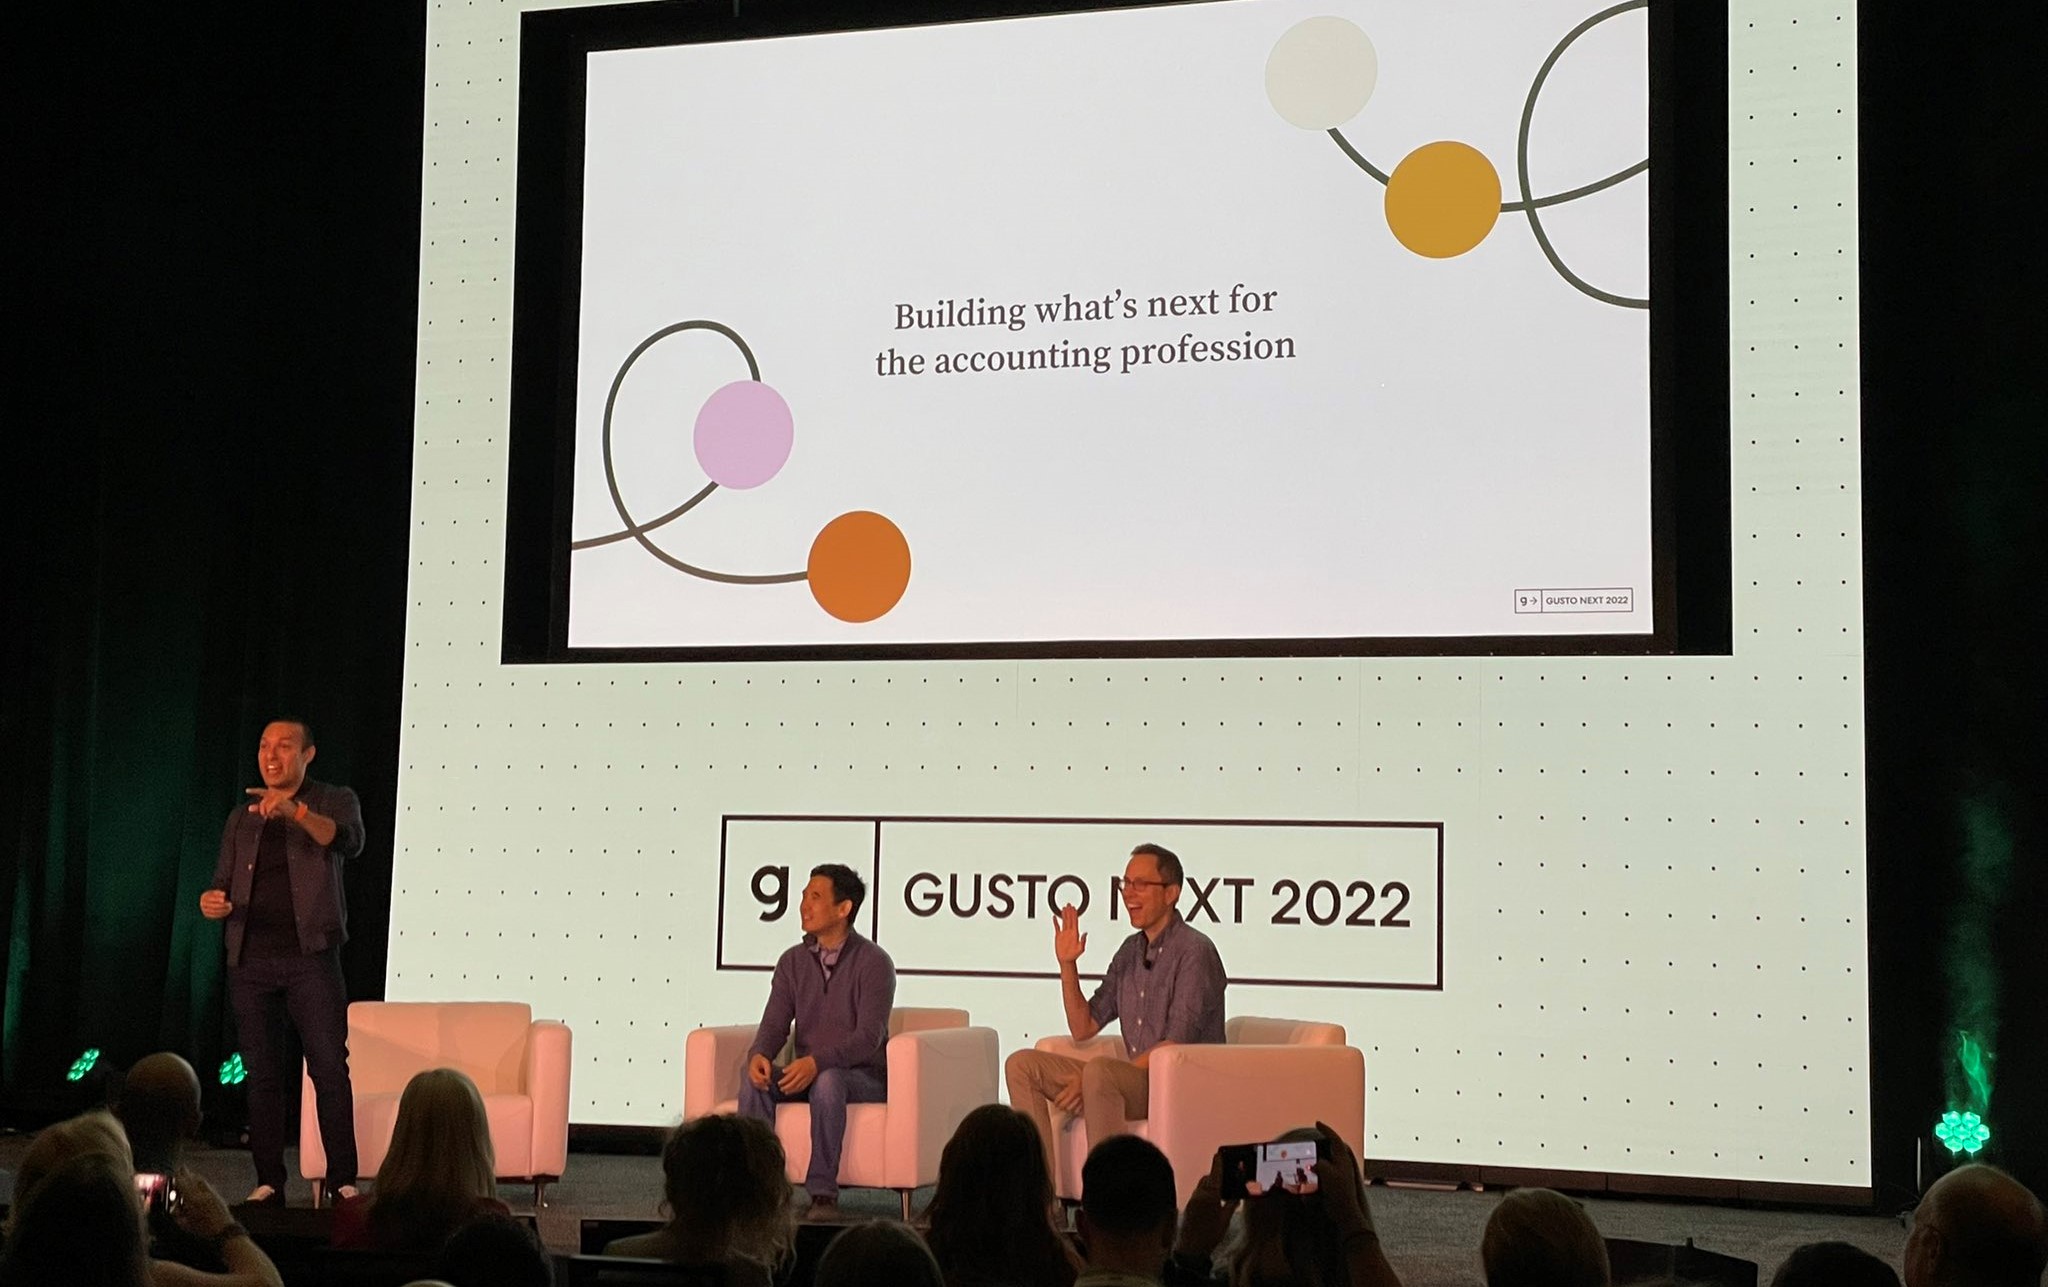 Gusto leadership team in an interview about the future roadmap